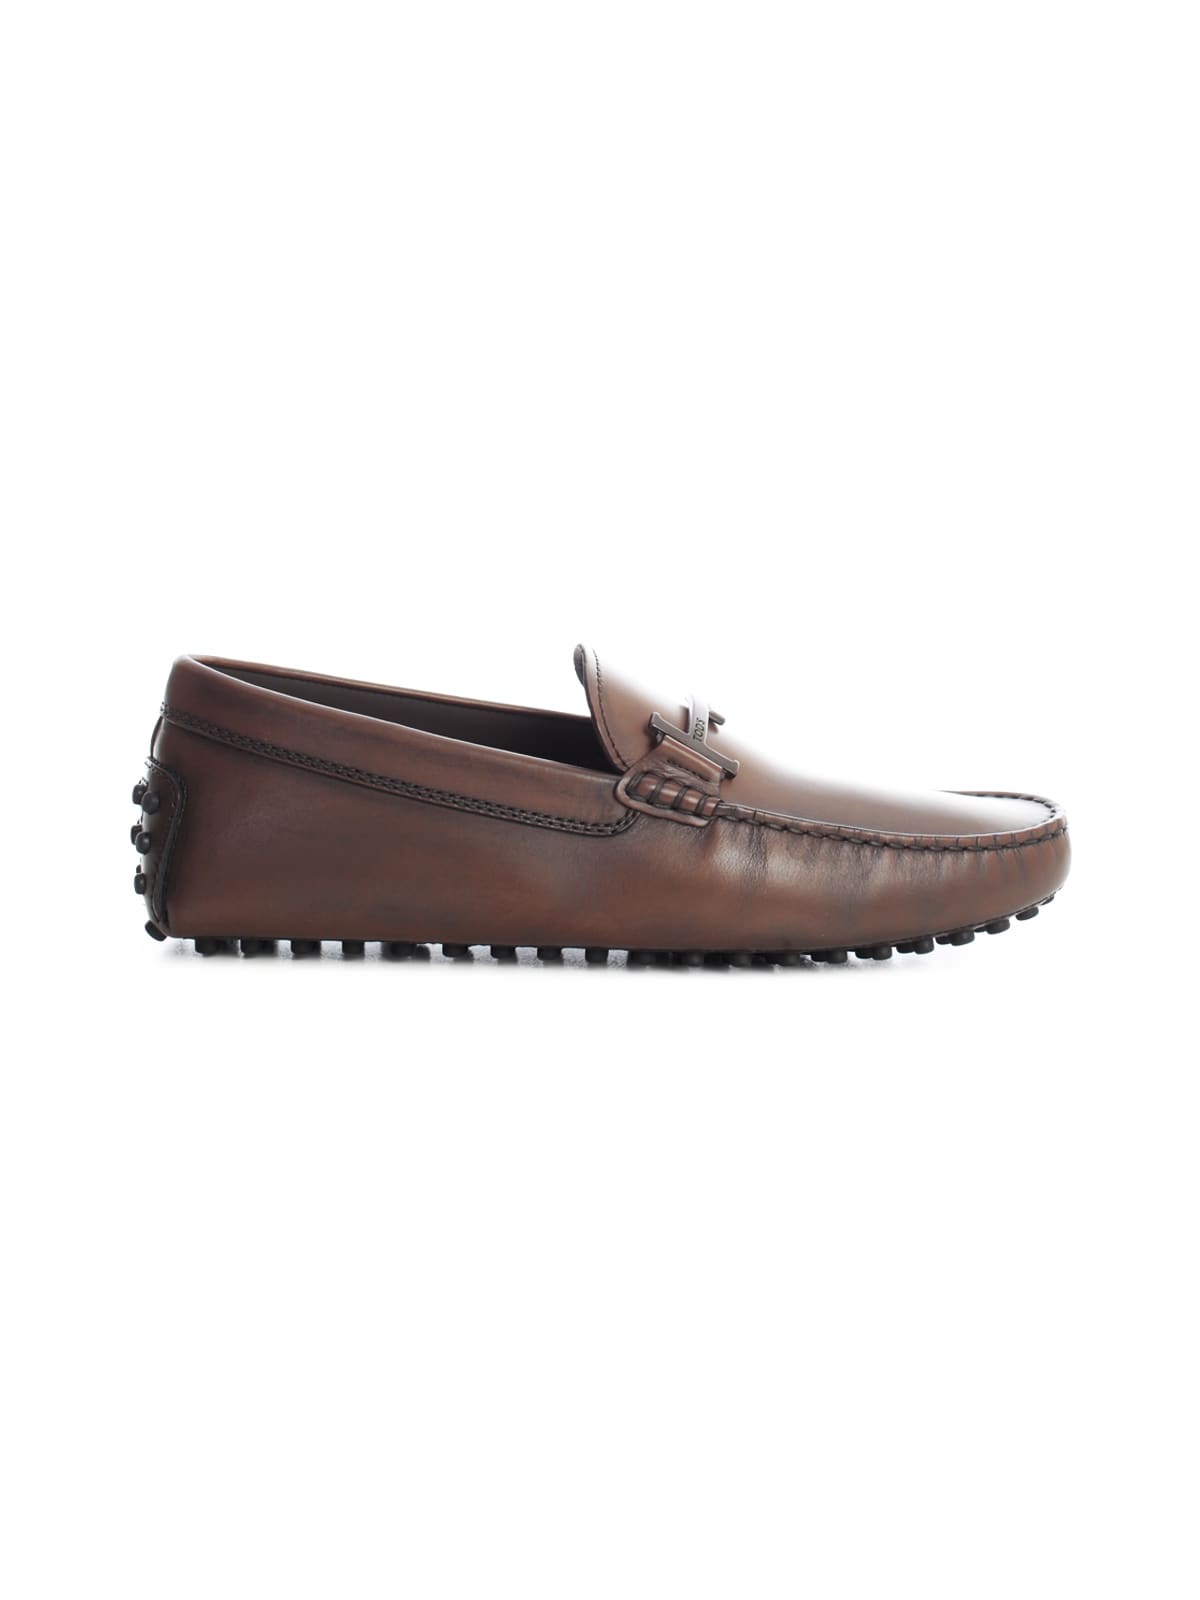 Tods Double T Flat Loafers